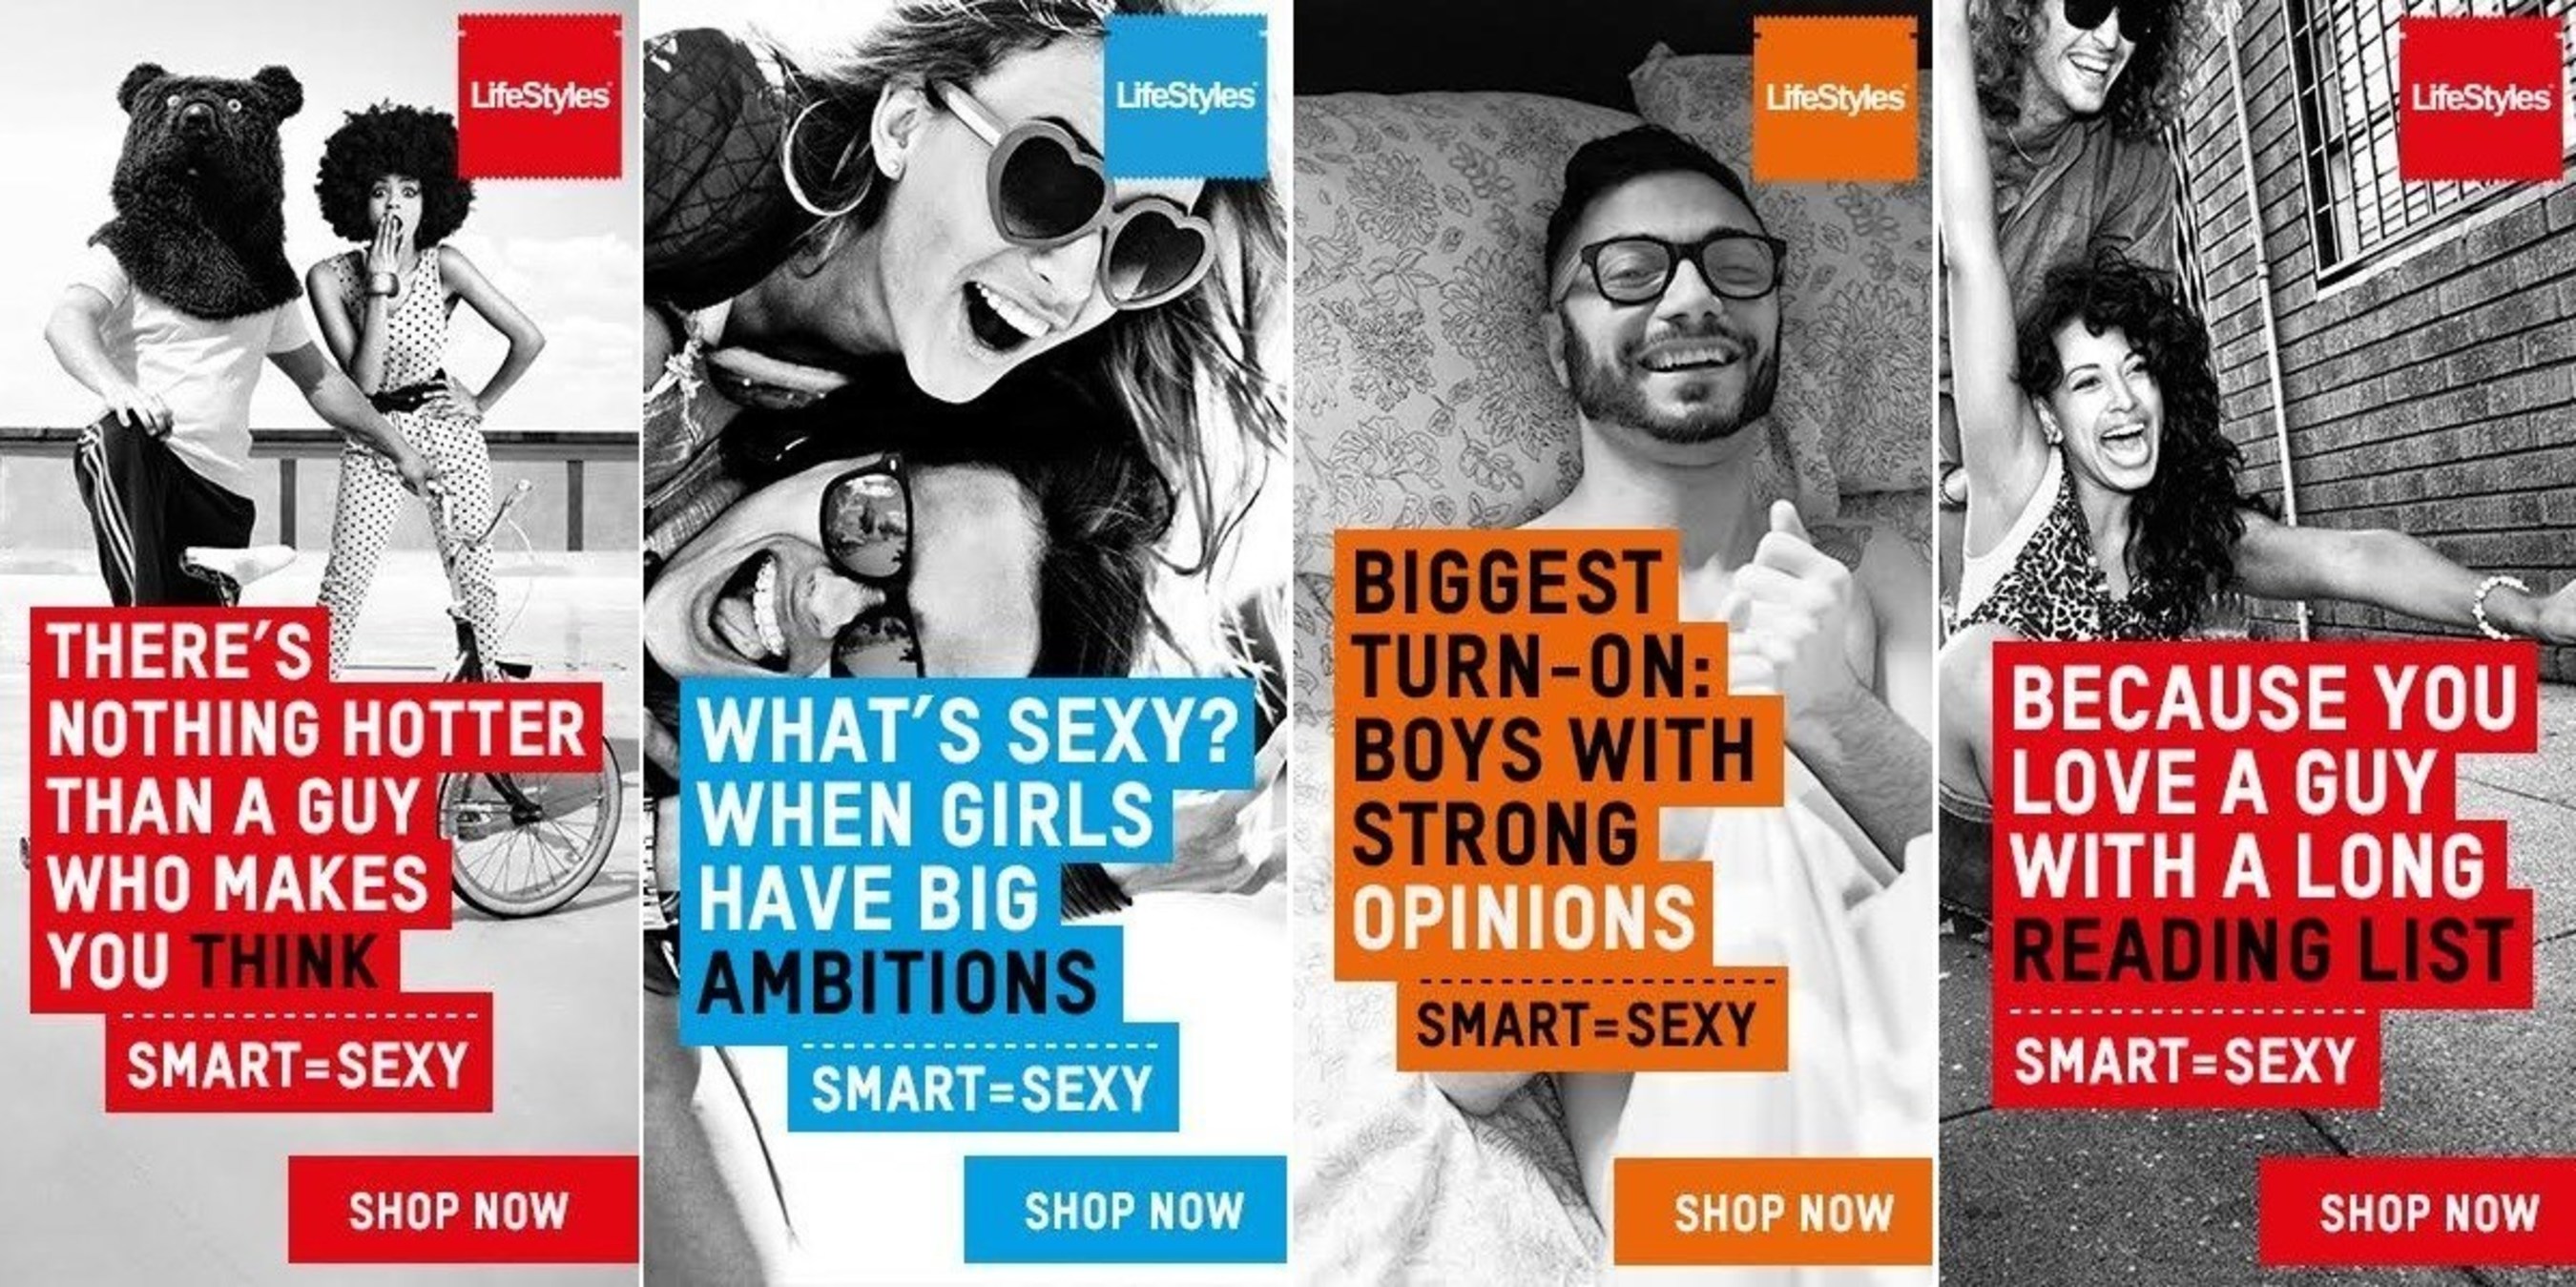 LifeStyles Condoms Launches "Smart is Sexy" Global Advertising Campaign to Redefine Sexiness